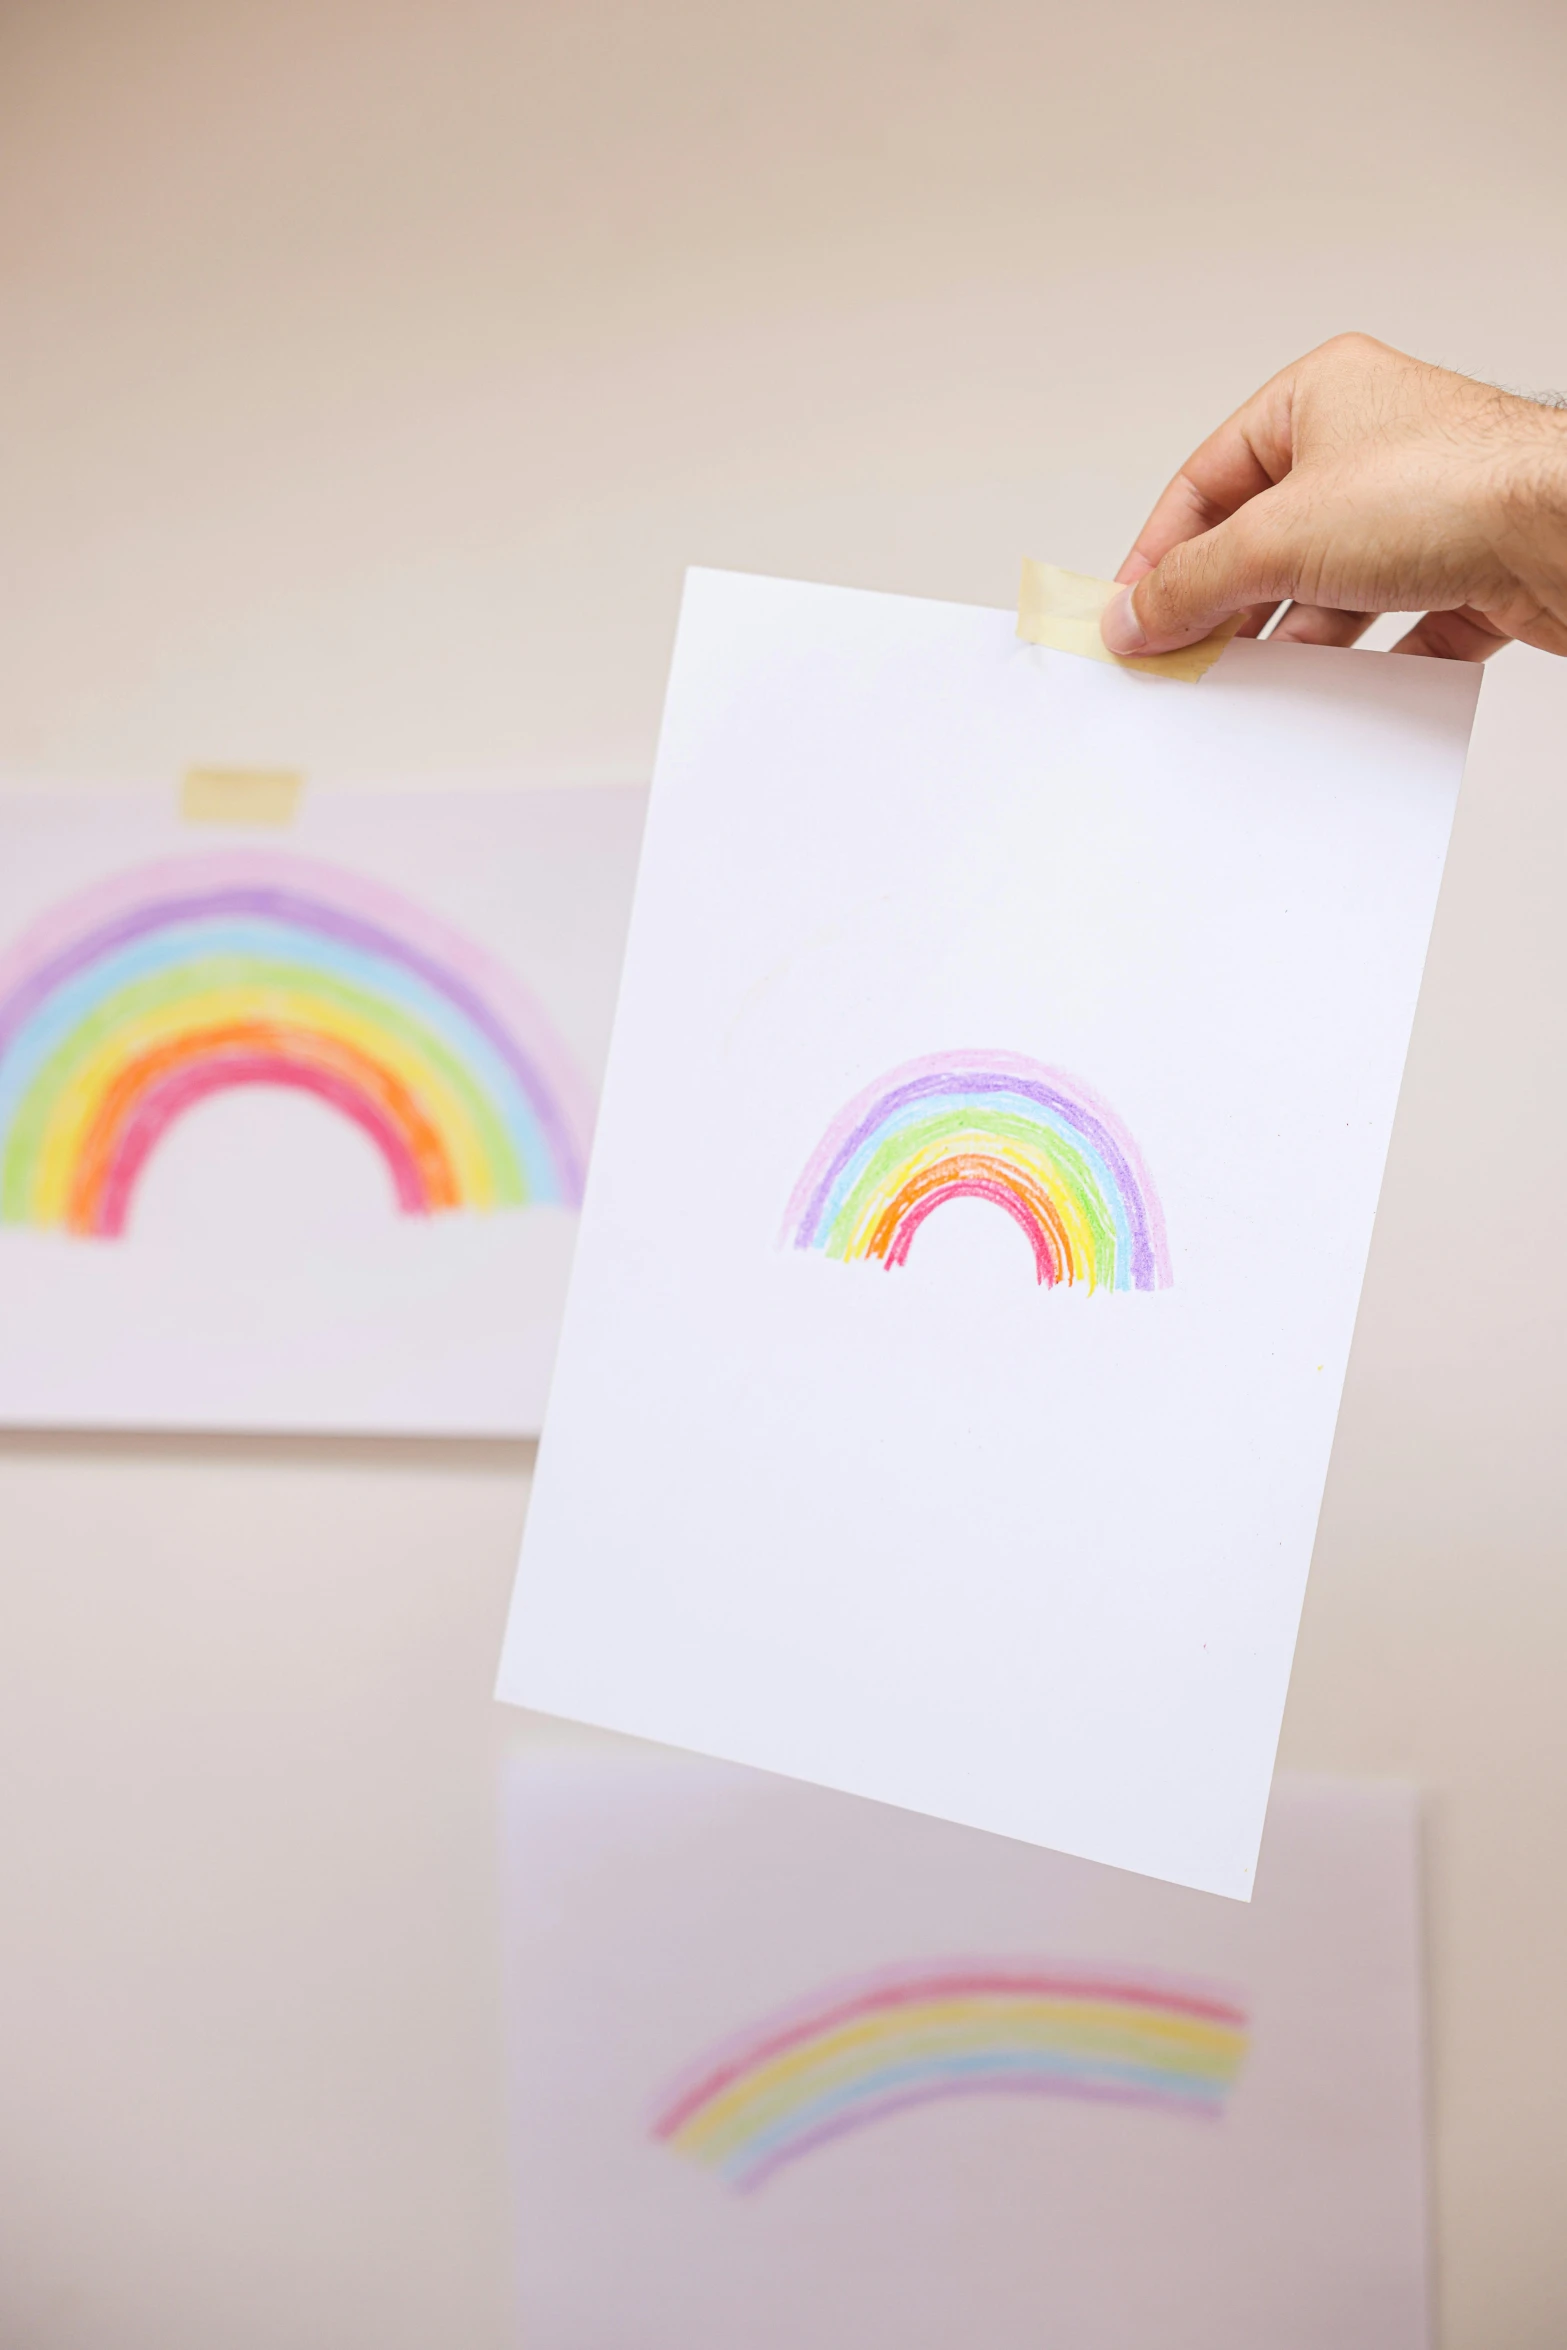 a person holding a piece of paper with a rainbow drawn on it, crayon art, glitter sticker, product introduction photo, large pastel, large portrait